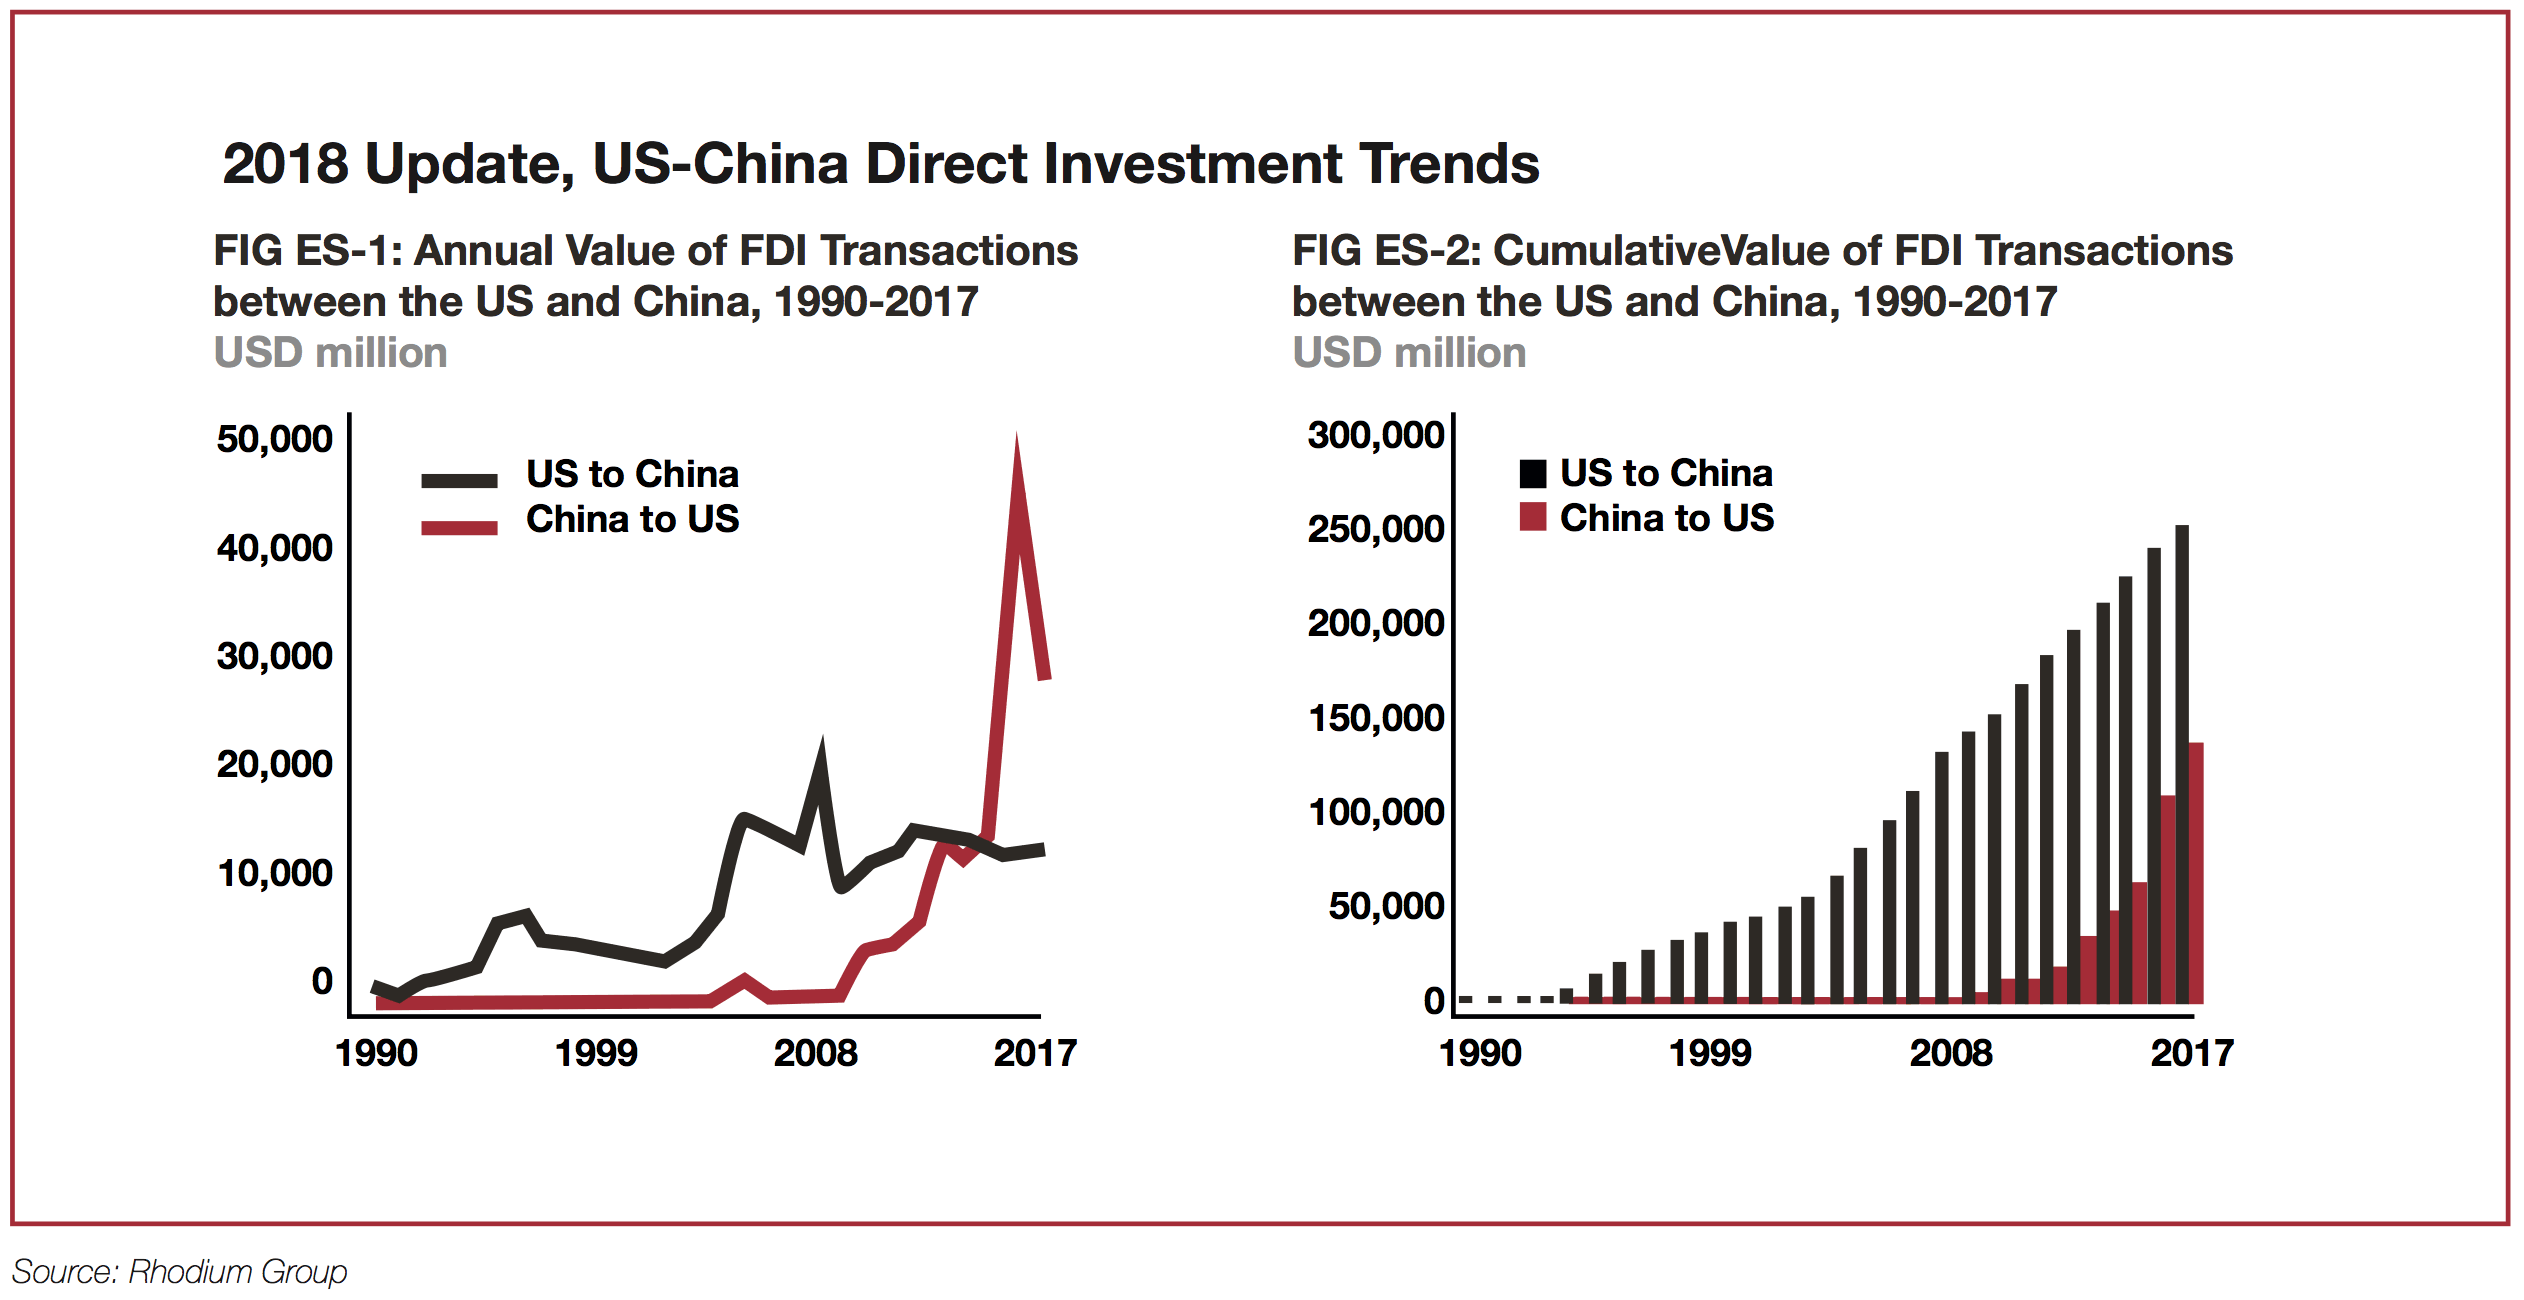 2018 Update, US-China Direct Investment Trends